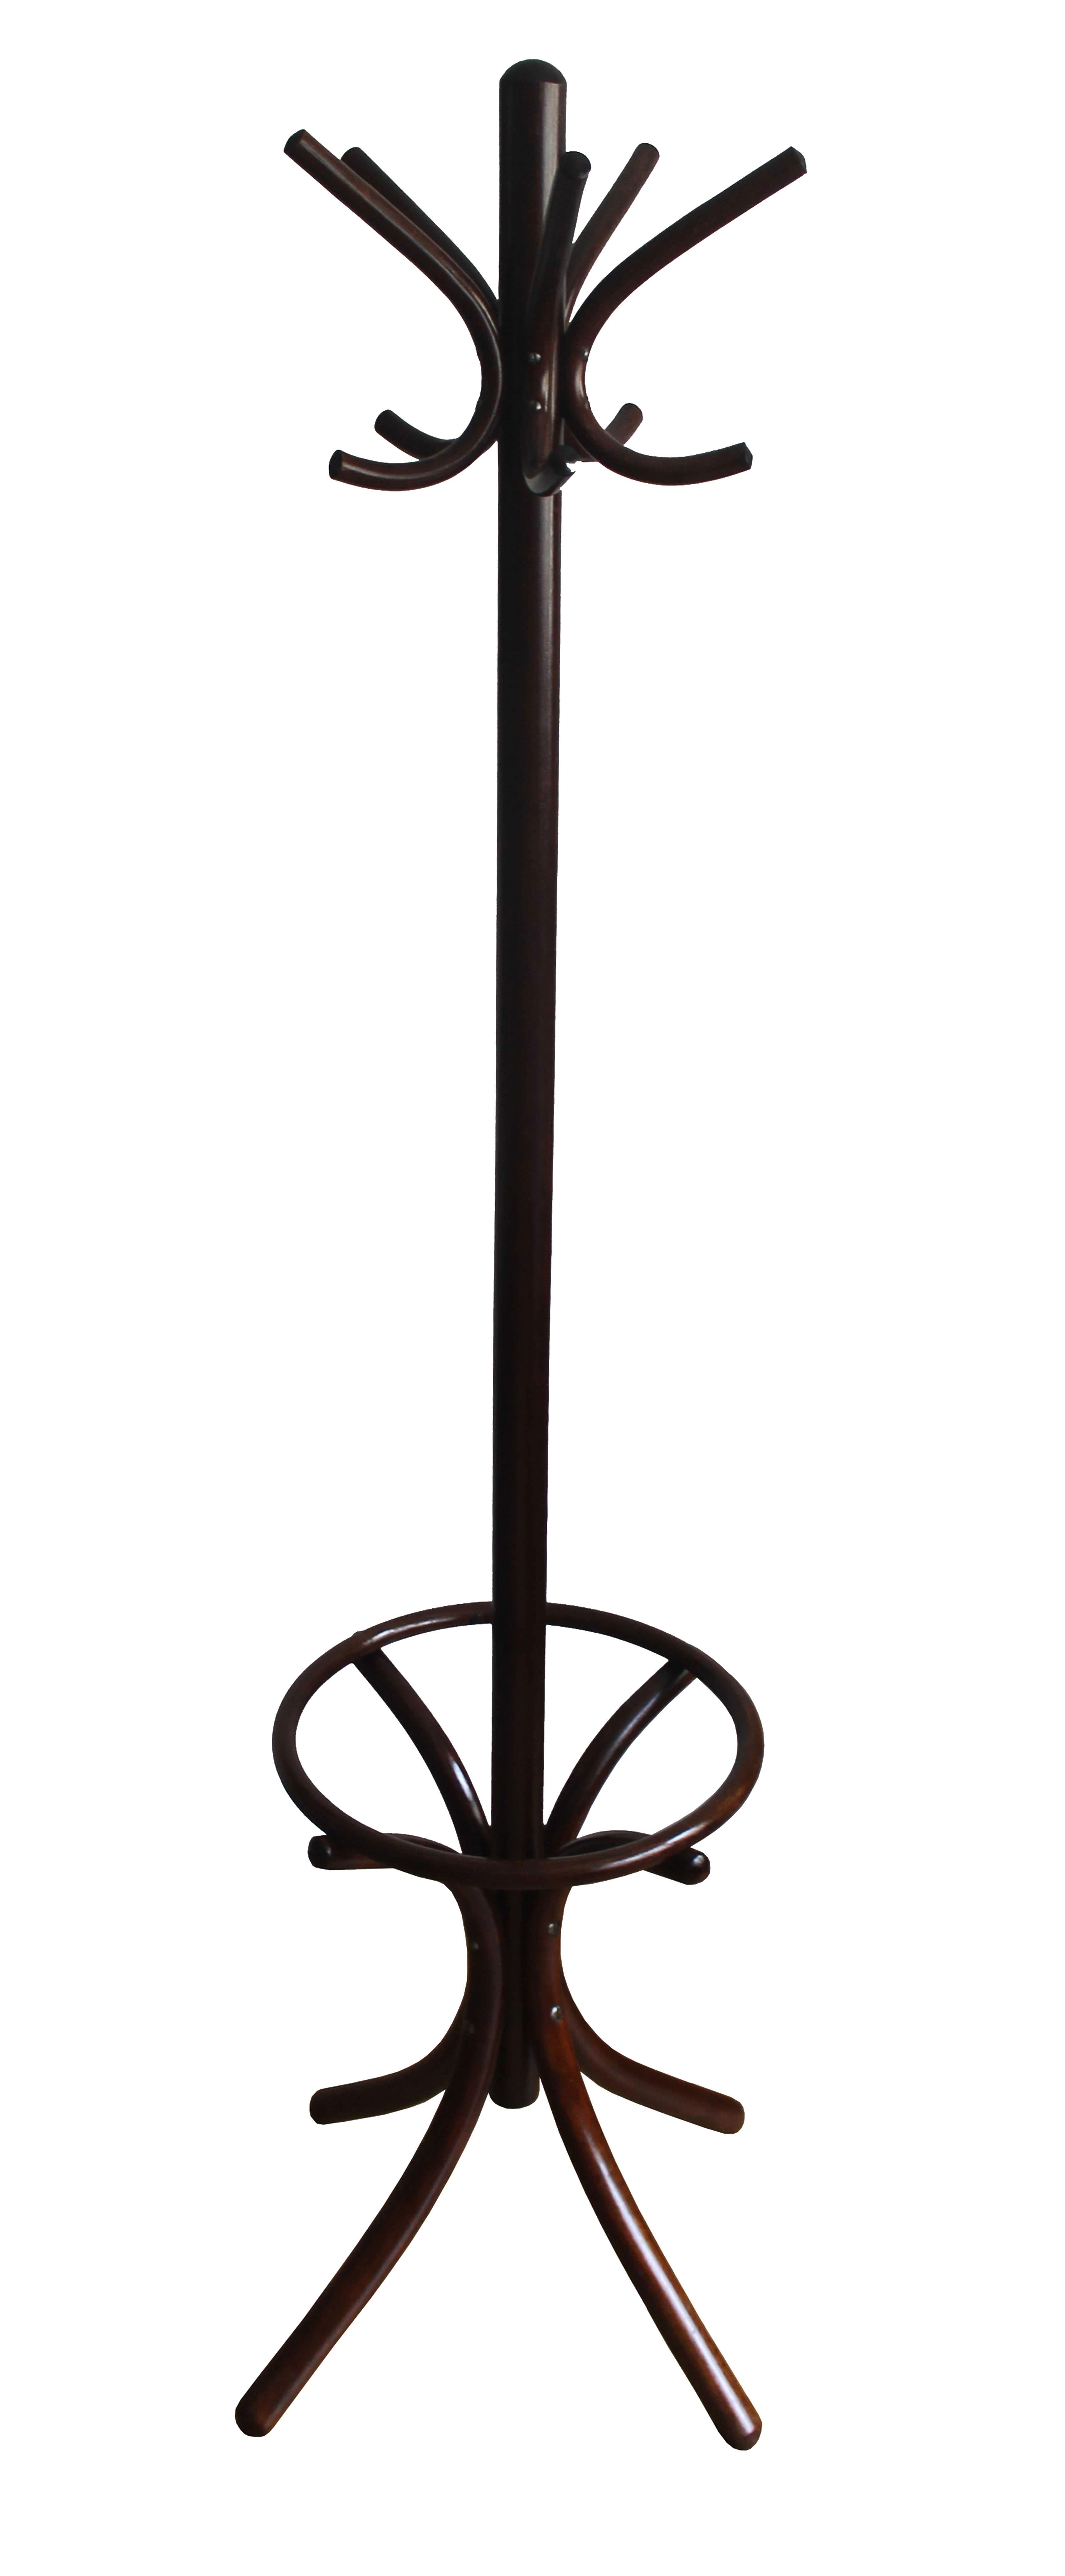 This dark brown coloured coat hanger is believed to be produced by Thonet in one of their factories in former Czechoslovakia around 1930. There is no manufacturer label visible but it has some detailing and the type of screws that were typical for